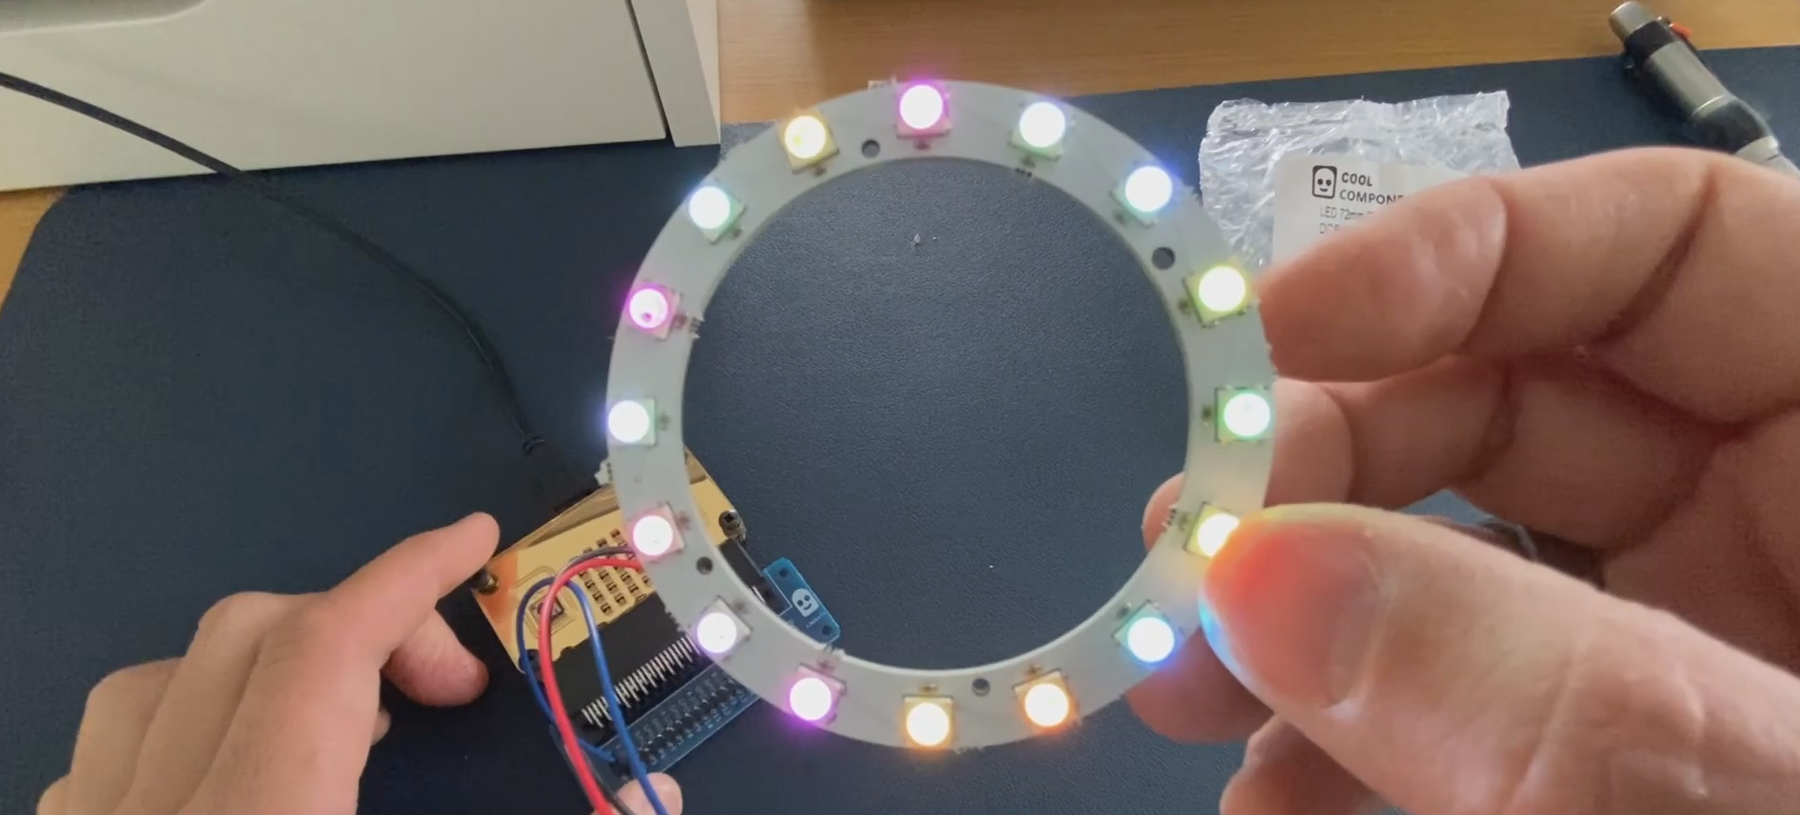 Using a NeoPixel LED with the BBC micro:bit